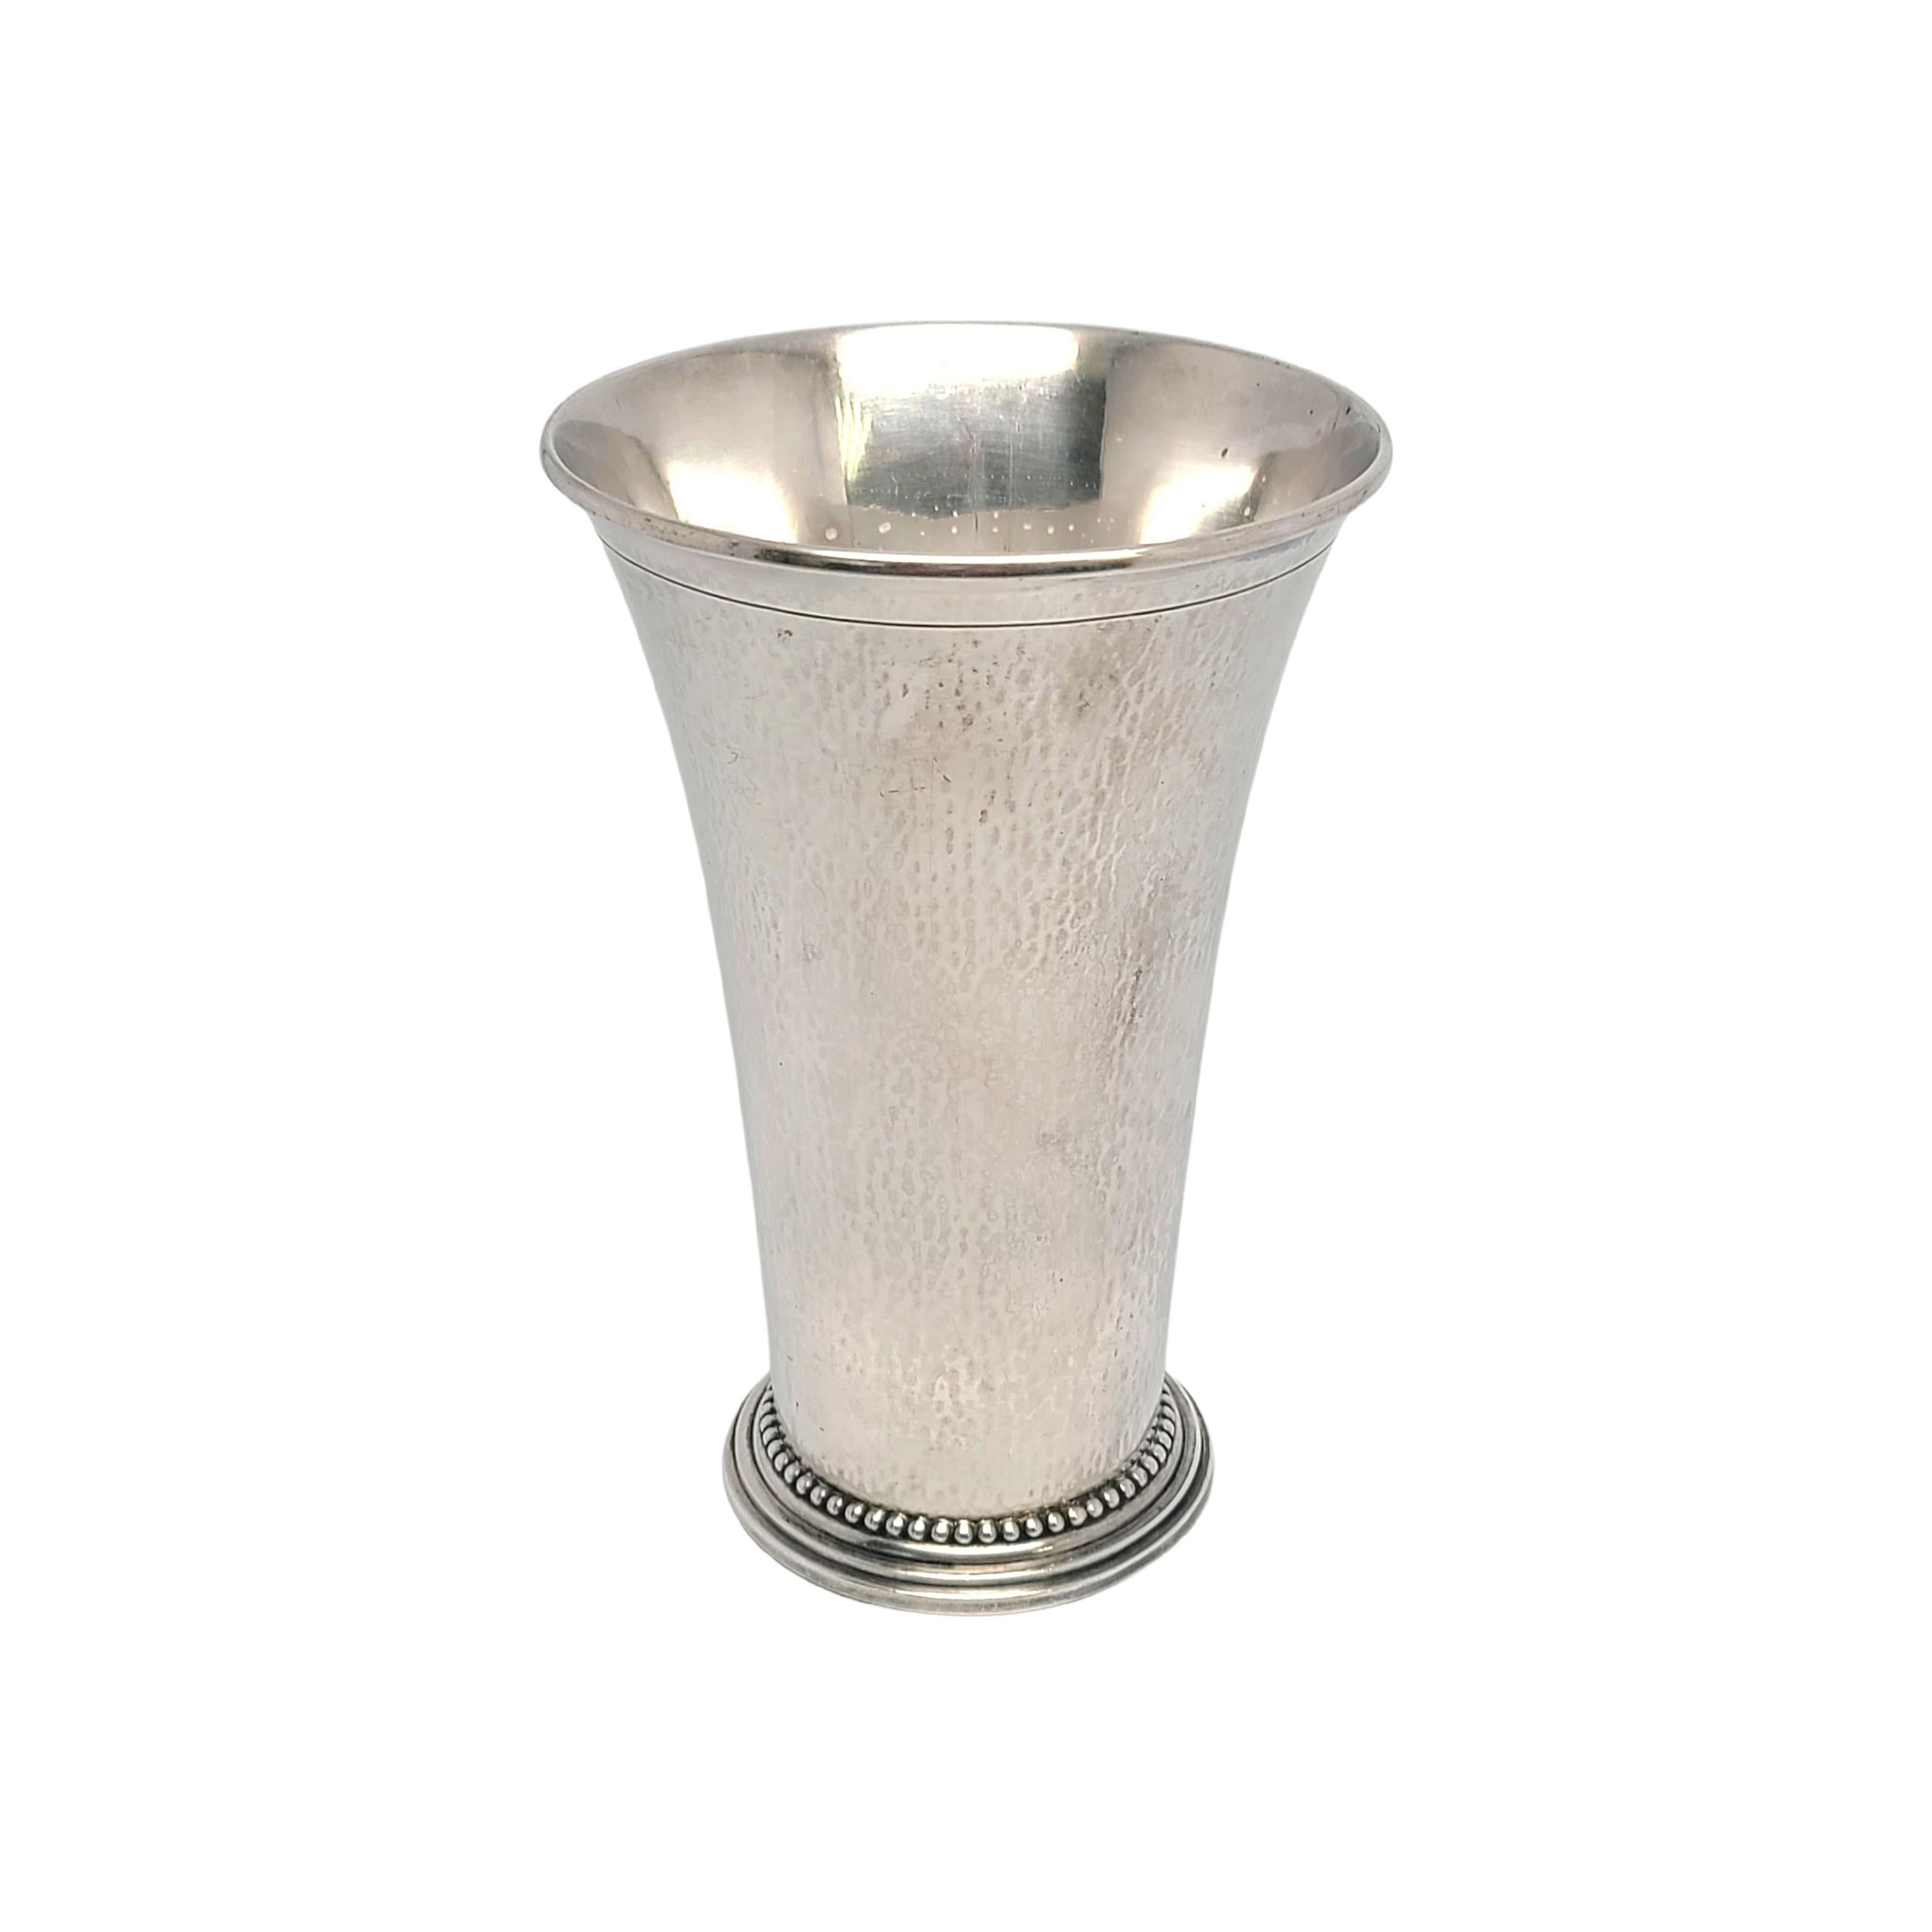 Vintage sterling silver beaker/tumbler cup/vase by Georg Jensen pattern #107B.

No monogram or engraving

This simple and elegant tumbler features a flare design with a lightly hammered finish and a stepped base with beaded edging.

Measures approx